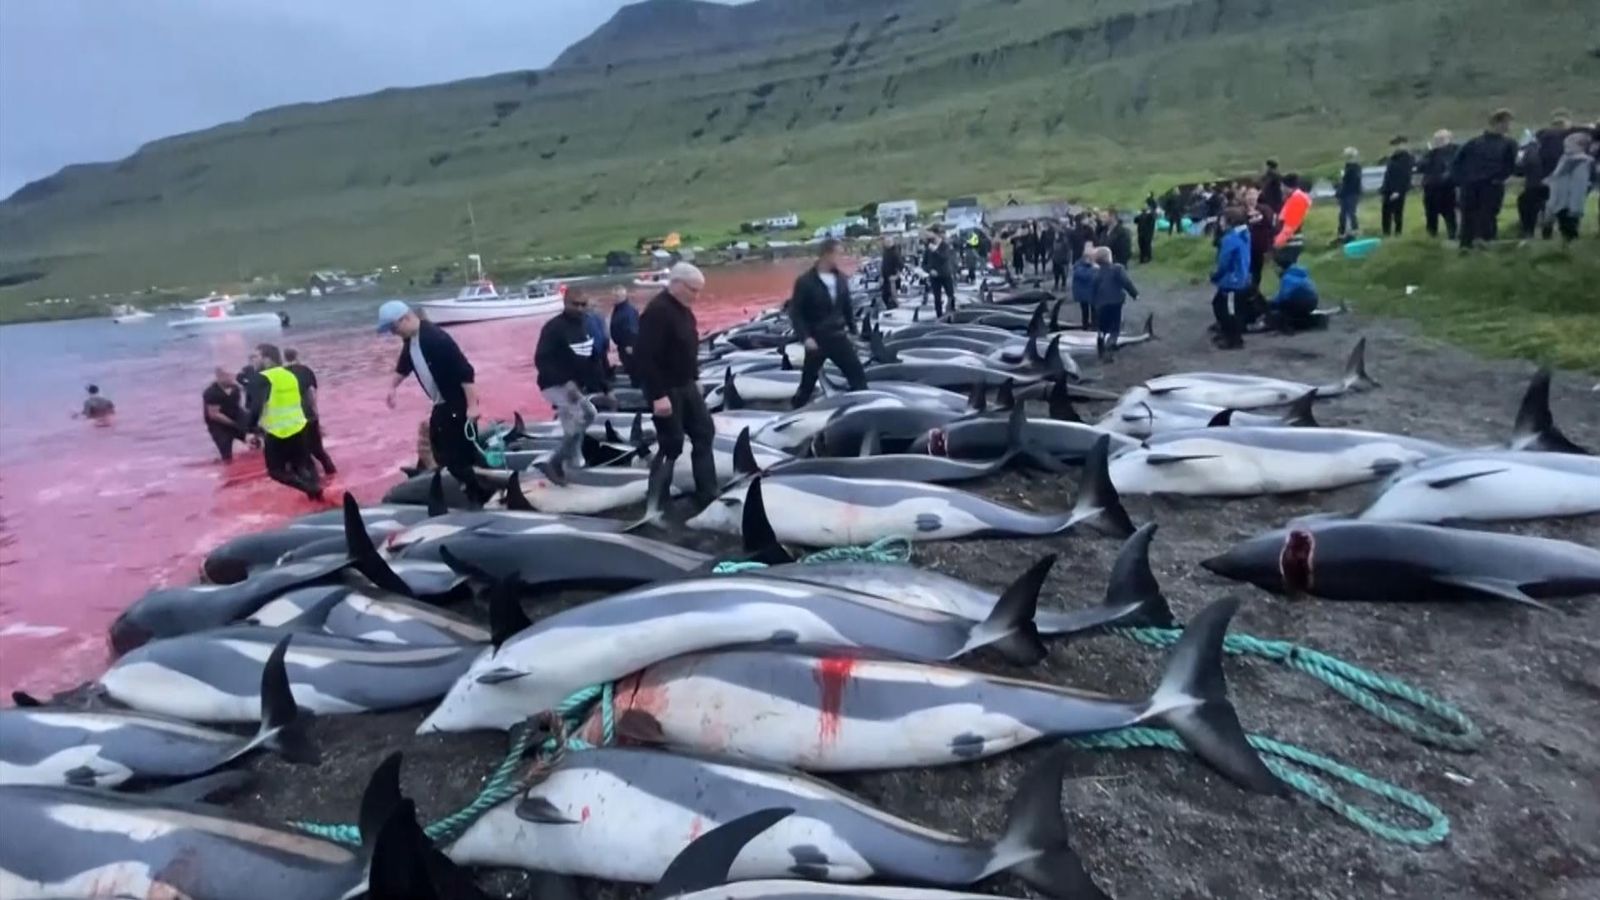 Dolphins slaughtered in record numbers on Faroe Islands, conservationists say | World News | Sky News